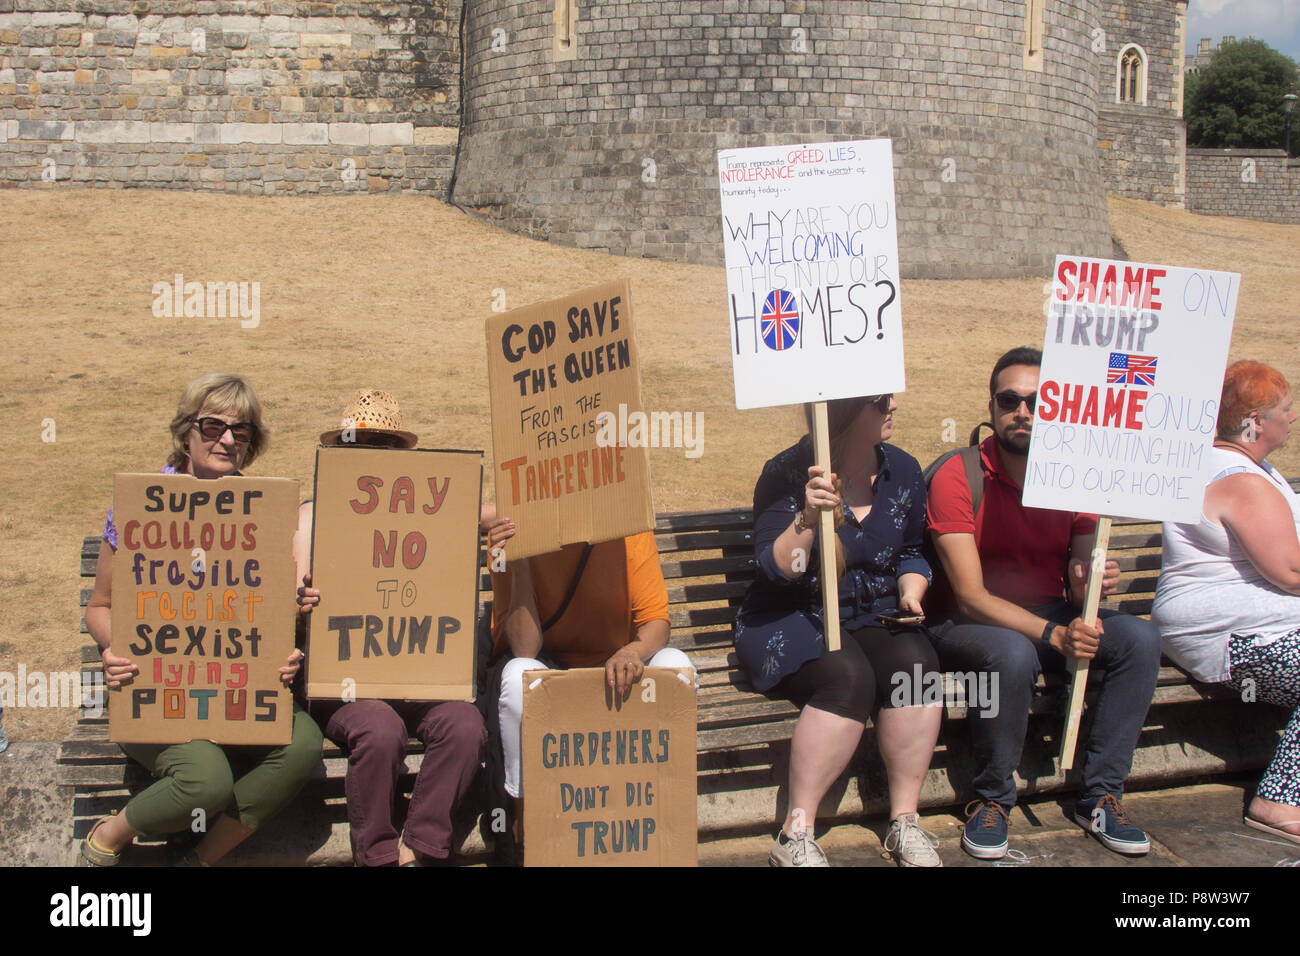 July 2018: Anti Trump protesters gathered outside Windsor Castle today, in advance of a visit by the US president. Windsor, UK  Bridget Catterall Windsor, UK Alamy Live News UK Stock Photo